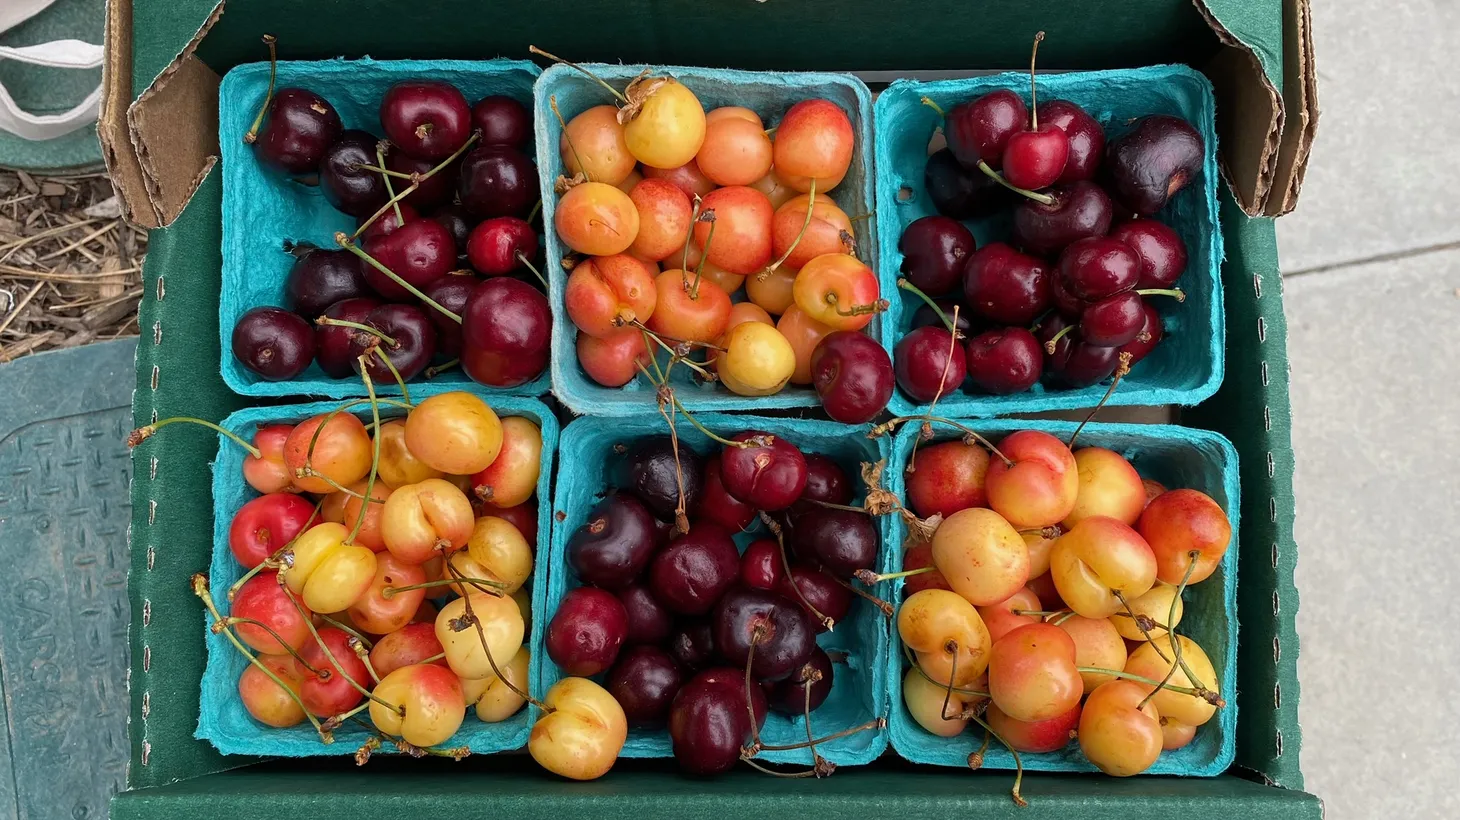 Murray Family Farm in Bakersfield grows 60 varieties of cherries that they bring to market each spring.